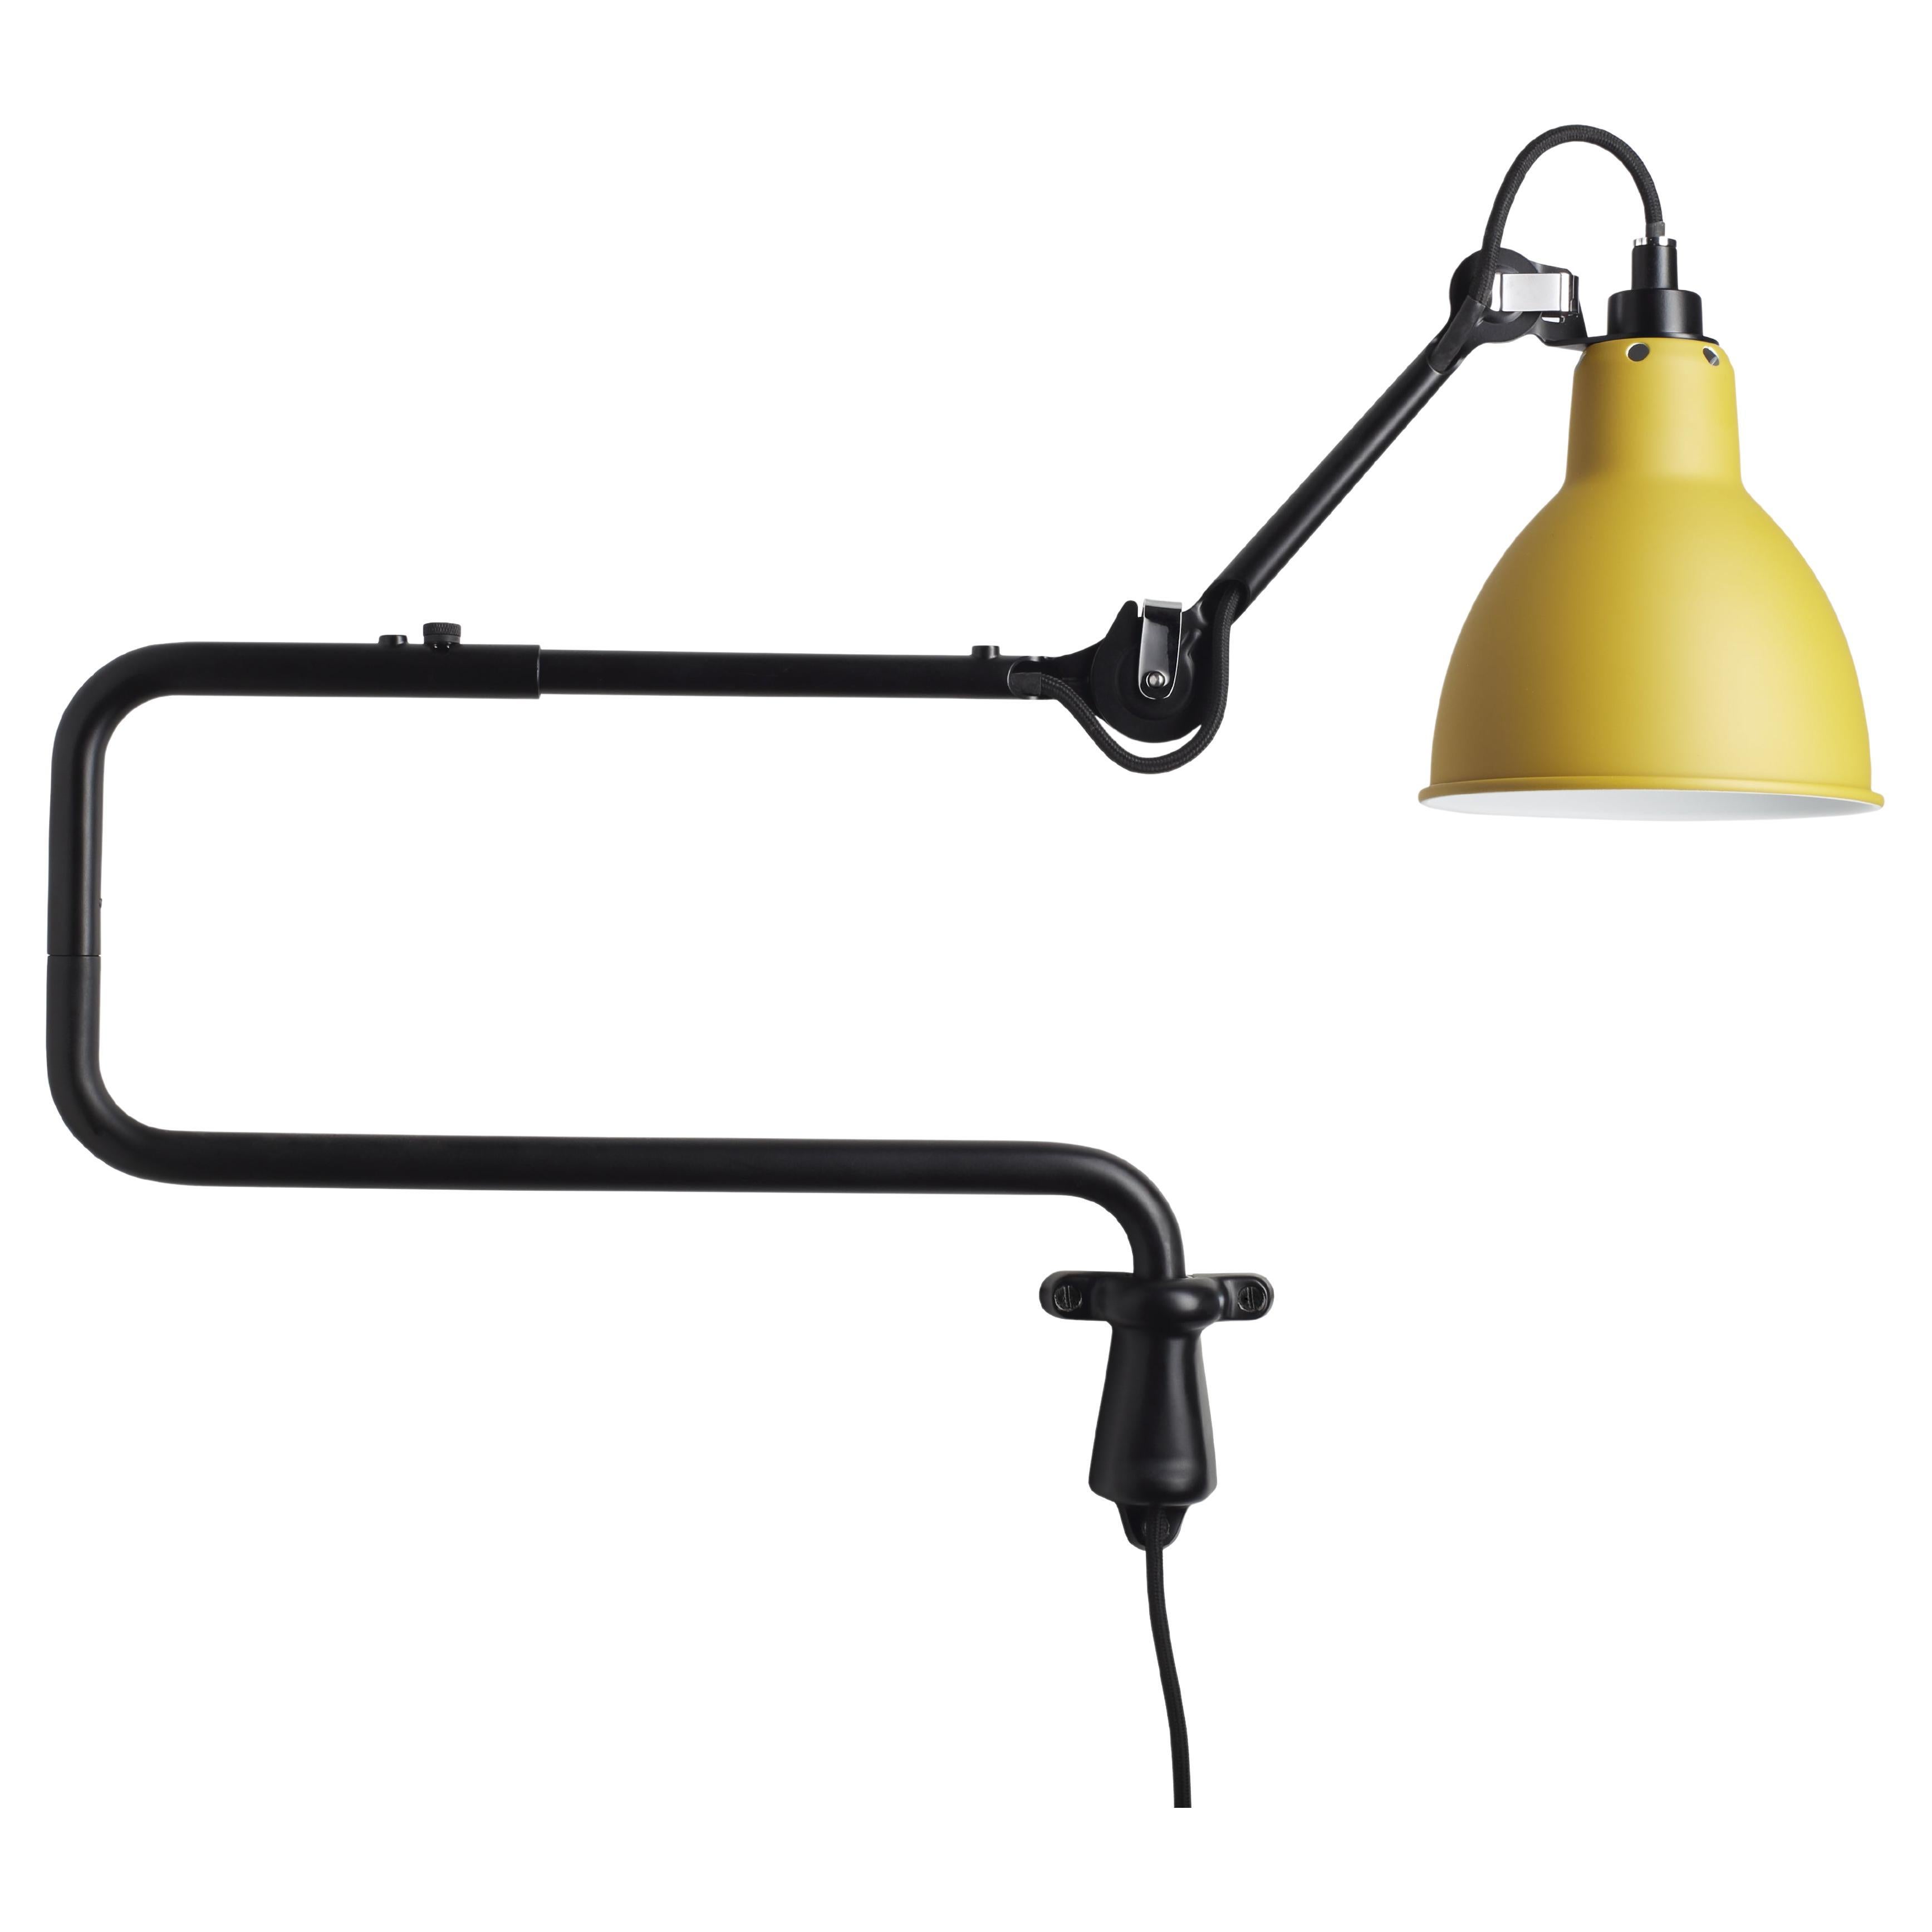 DCW Editions La Lampe Gras N°303 Wall Lamp in Black Arm and Yellow Shade For Sale